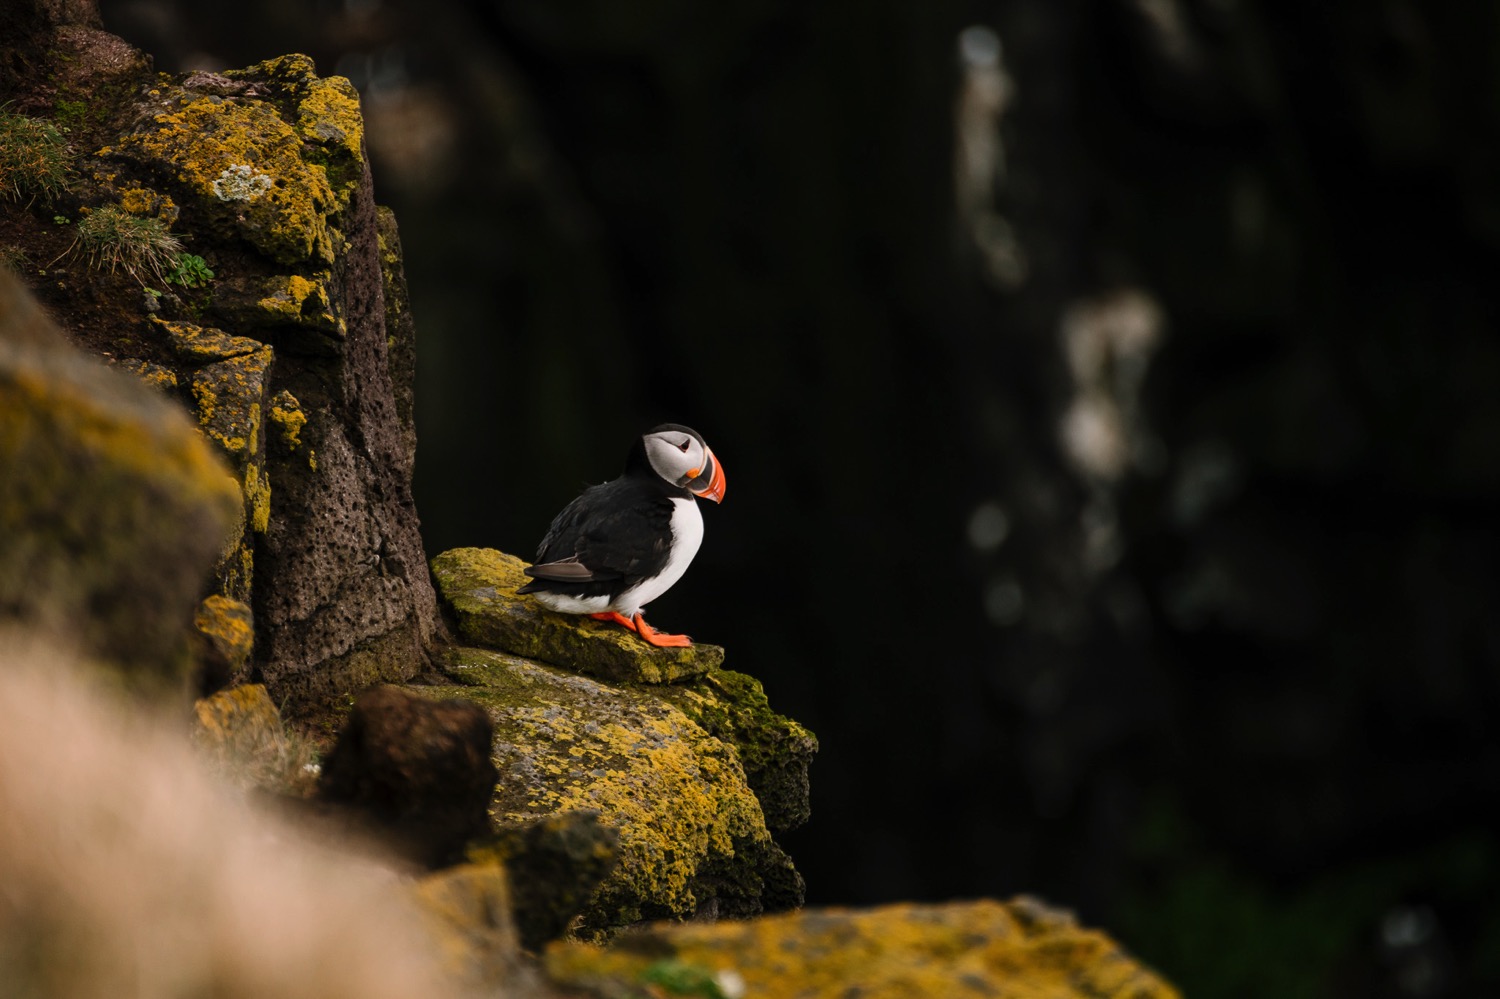  Puffins of Latrabjarg - Iceland Blog Part II

Photo by Trung Hoang Photography |www.trunghoangphotography.com | San Francisco Bay Area Wedding Photographer 